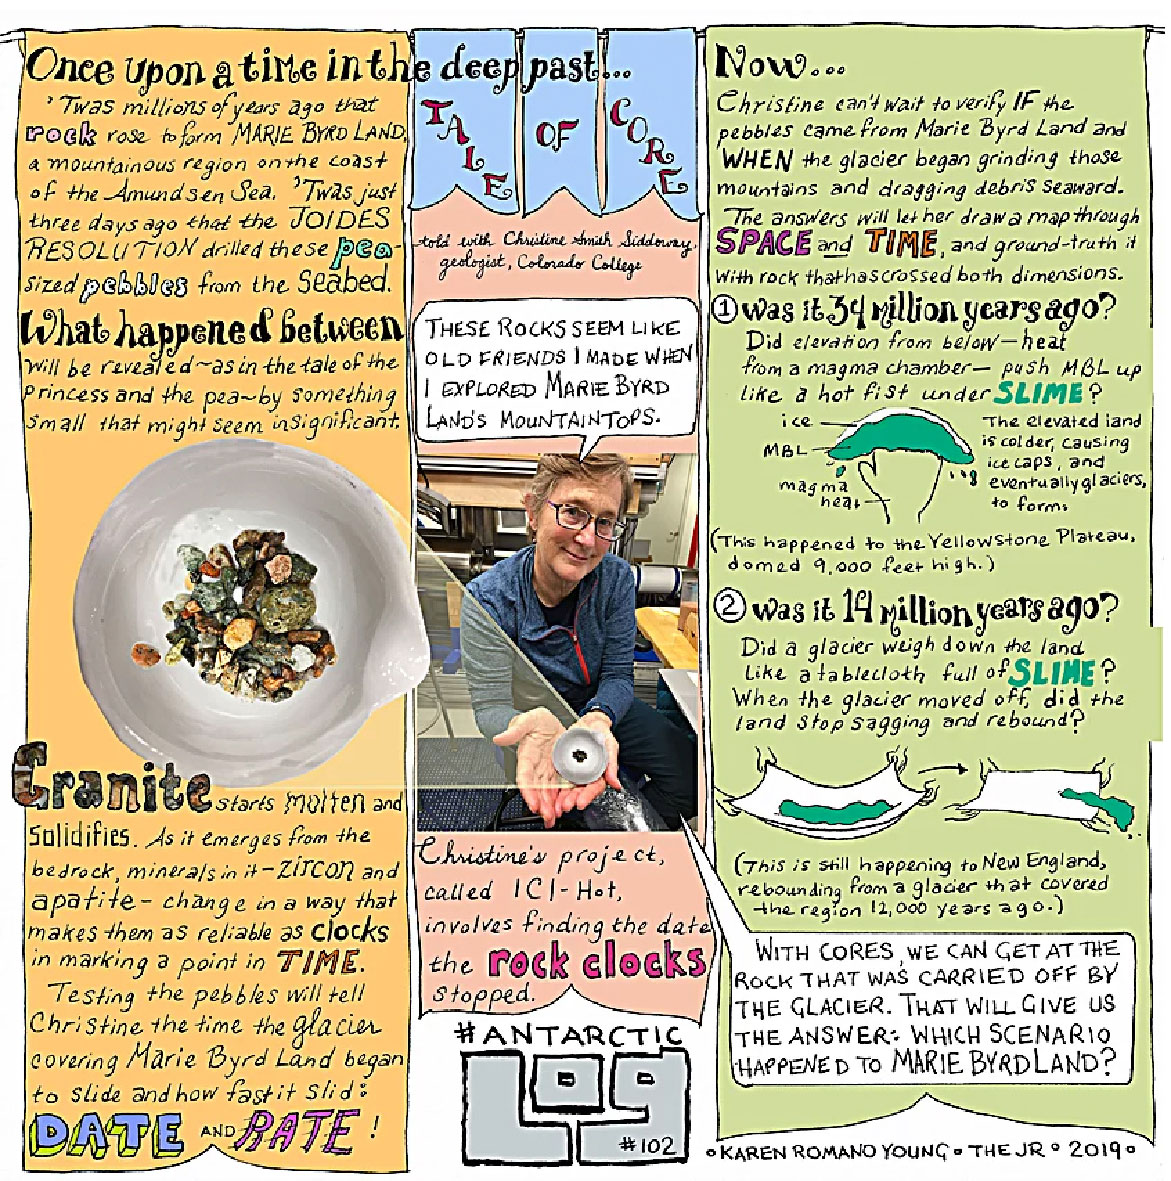 A feature on the ICI-Hot project from AntarcticLOG 2019 , by artist Karen Romano Young, who sailed on IODP379.